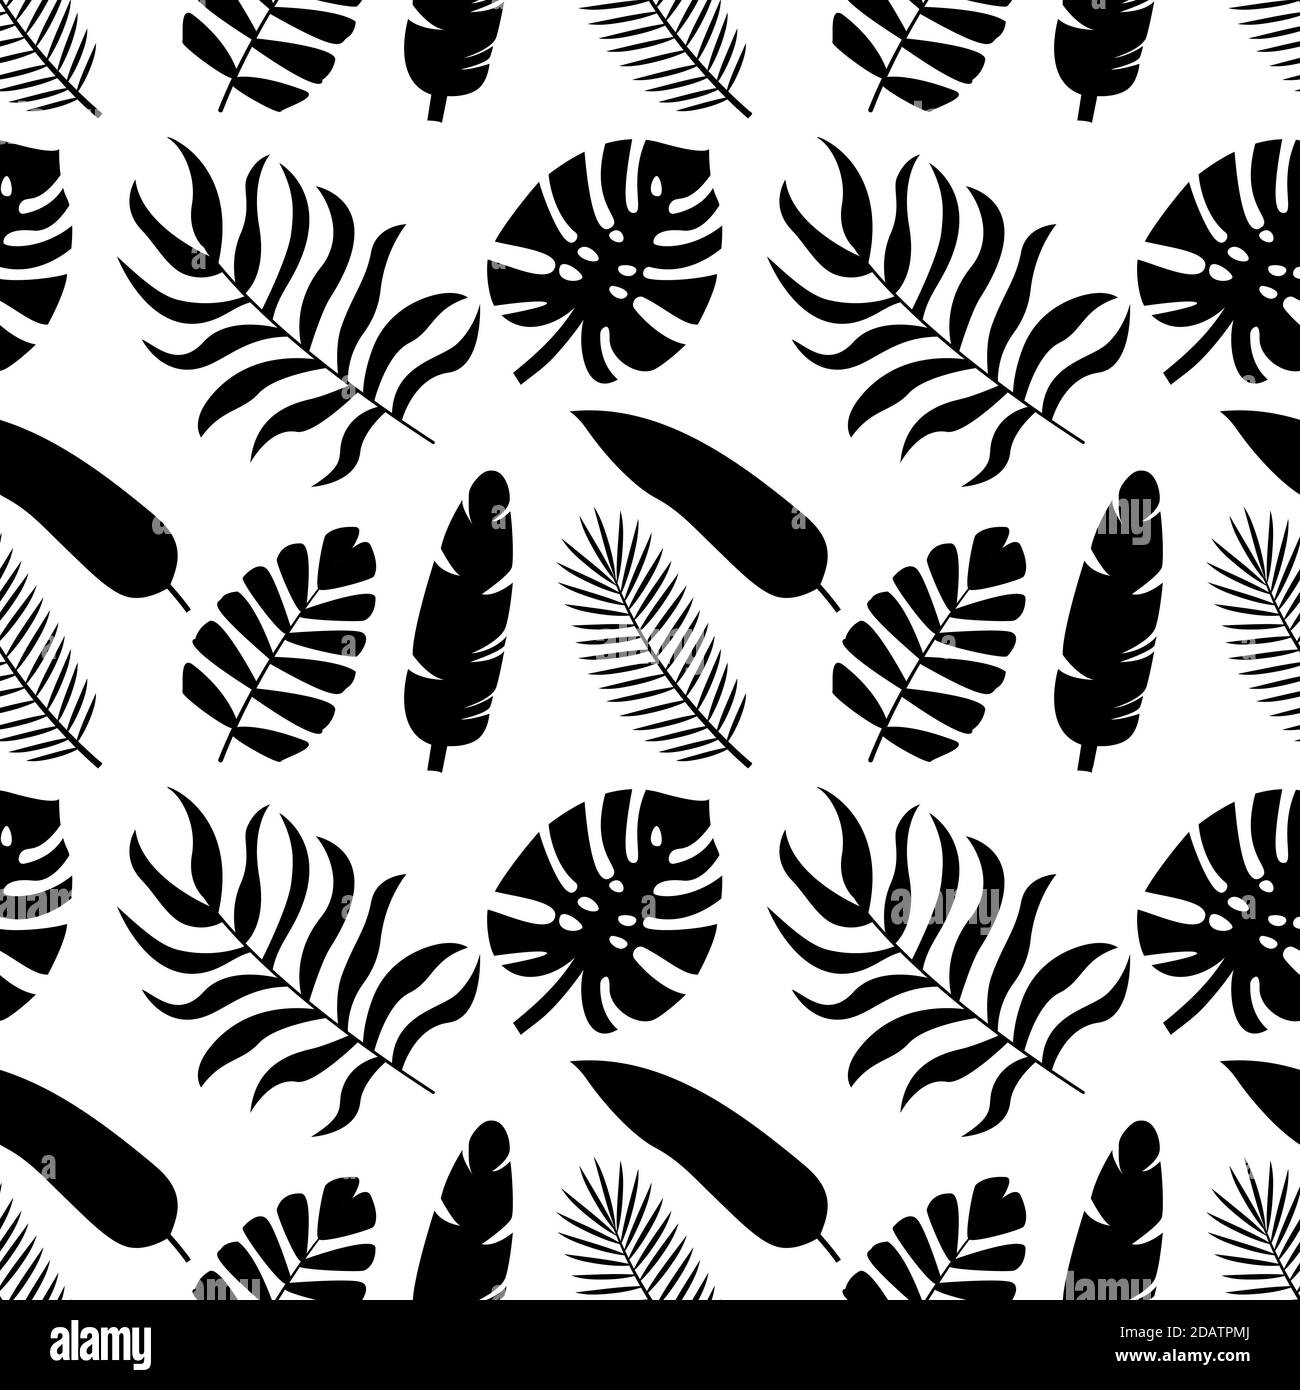 Seamless pattern tropical silhouettes of palm leaves. Monstera, coconut, banana, mango, chamaedorea. Vector illustration on white background Stock Vector